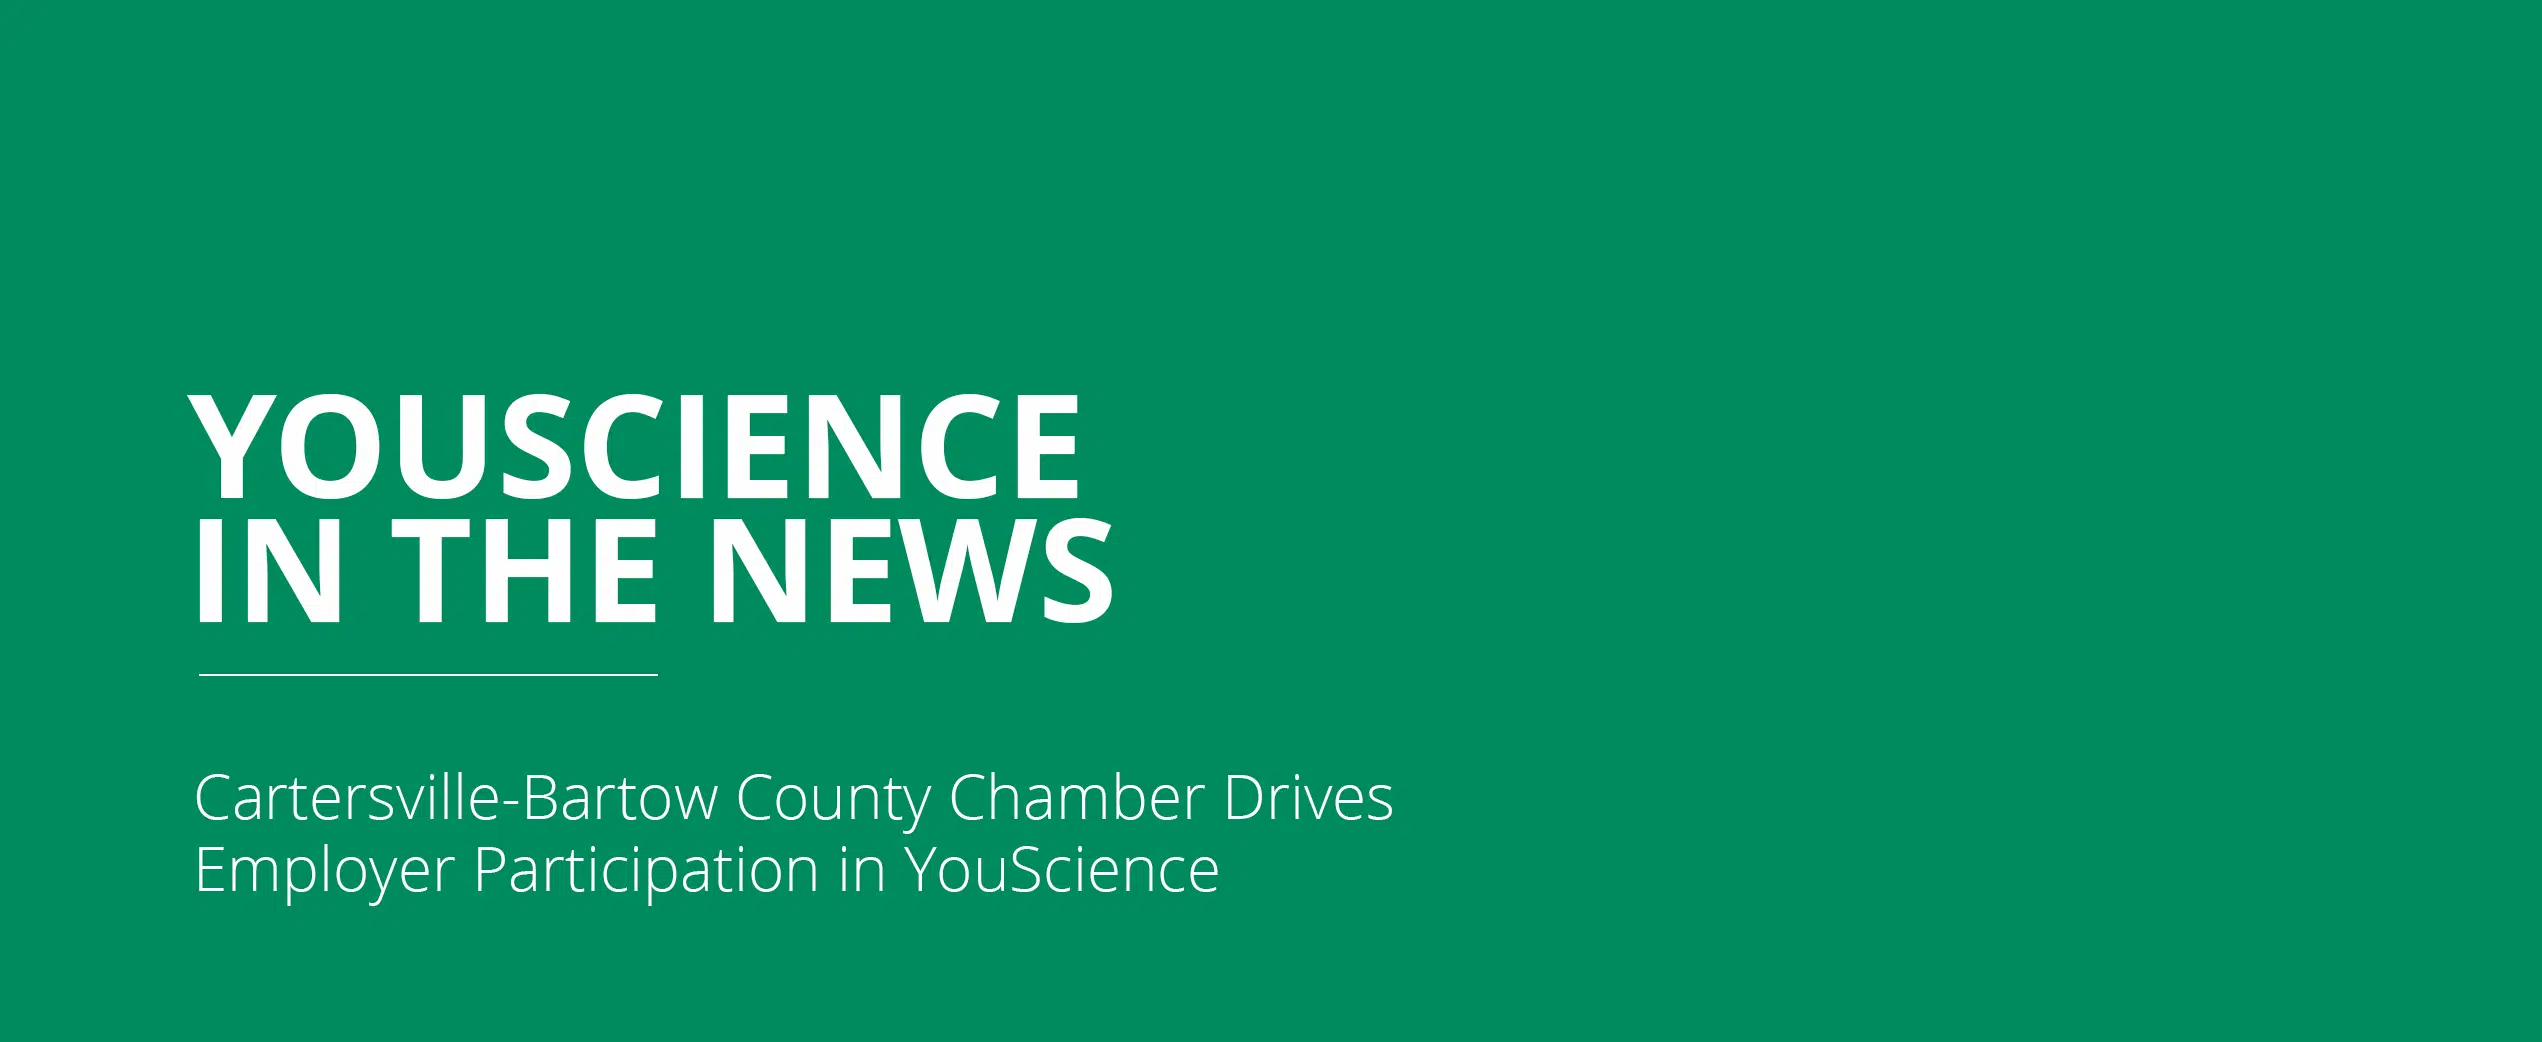 Cartersville-Bartow County Chamber Drives Employer Participation in YouScience